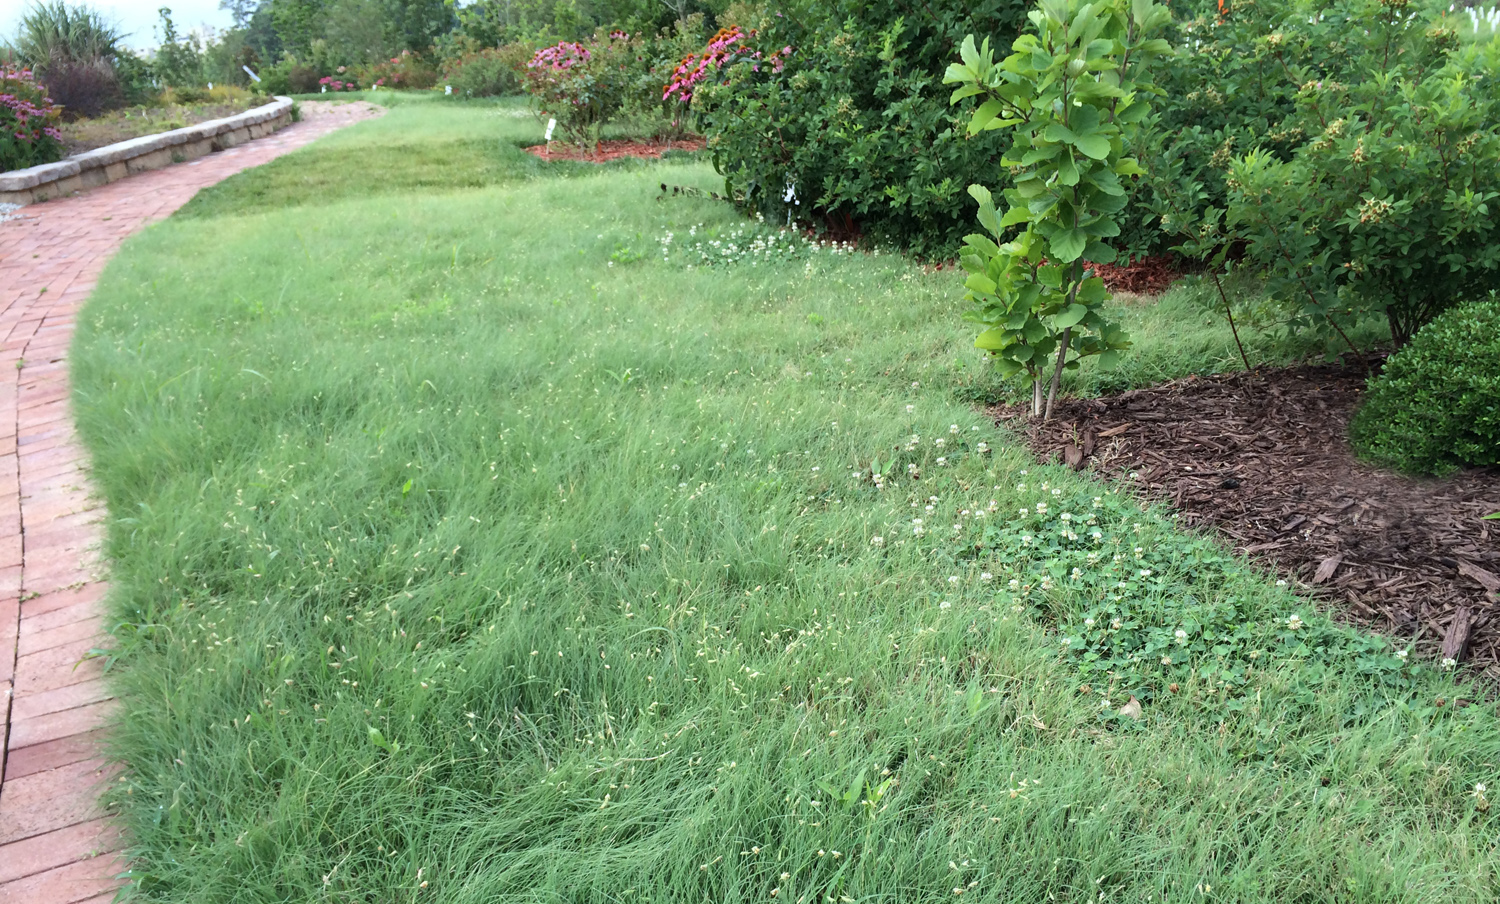 Field trials with Buffalo Grass show an attractive lawn, but weeds must still be managed.